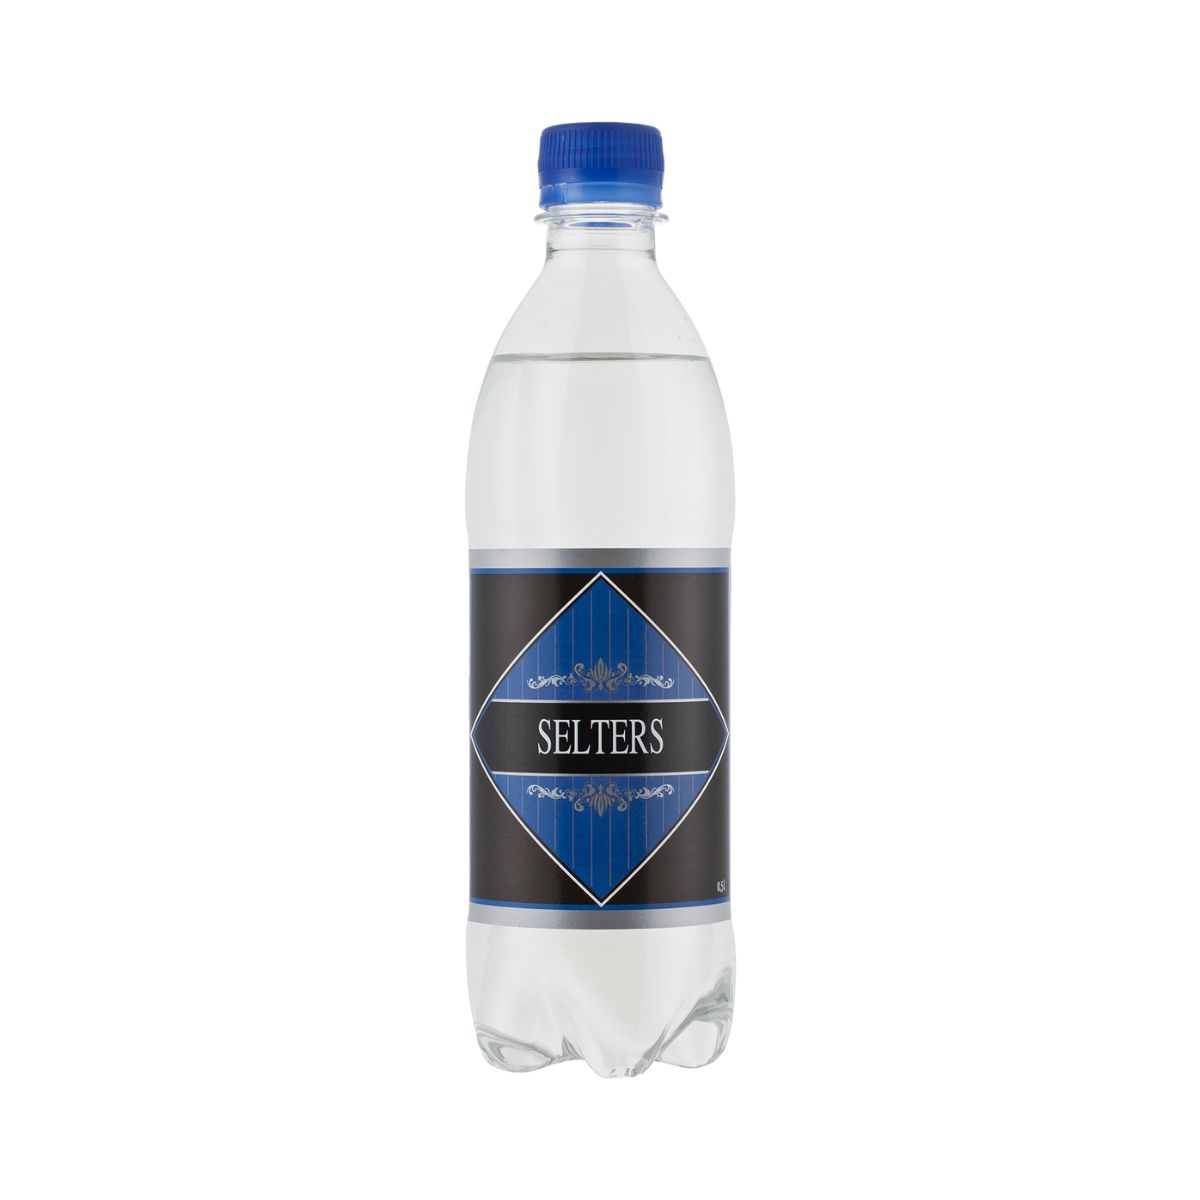 Selters 0.5l